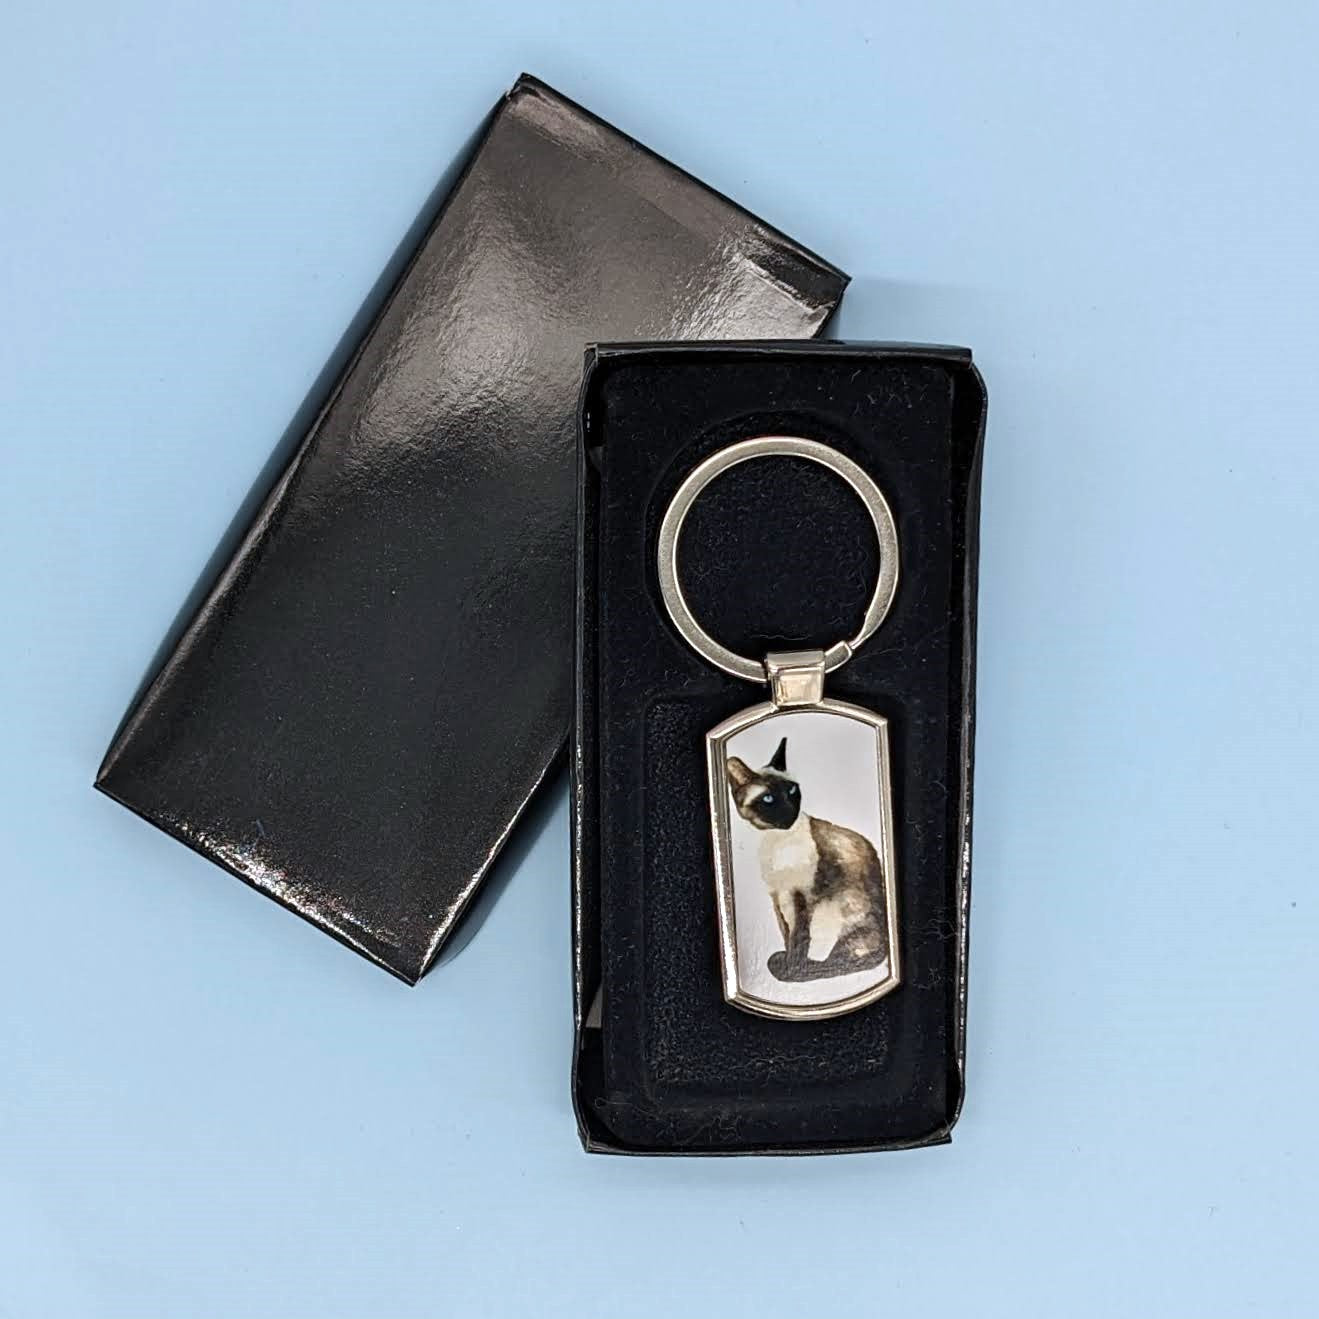 "If you please" Siamese Cat Keyring